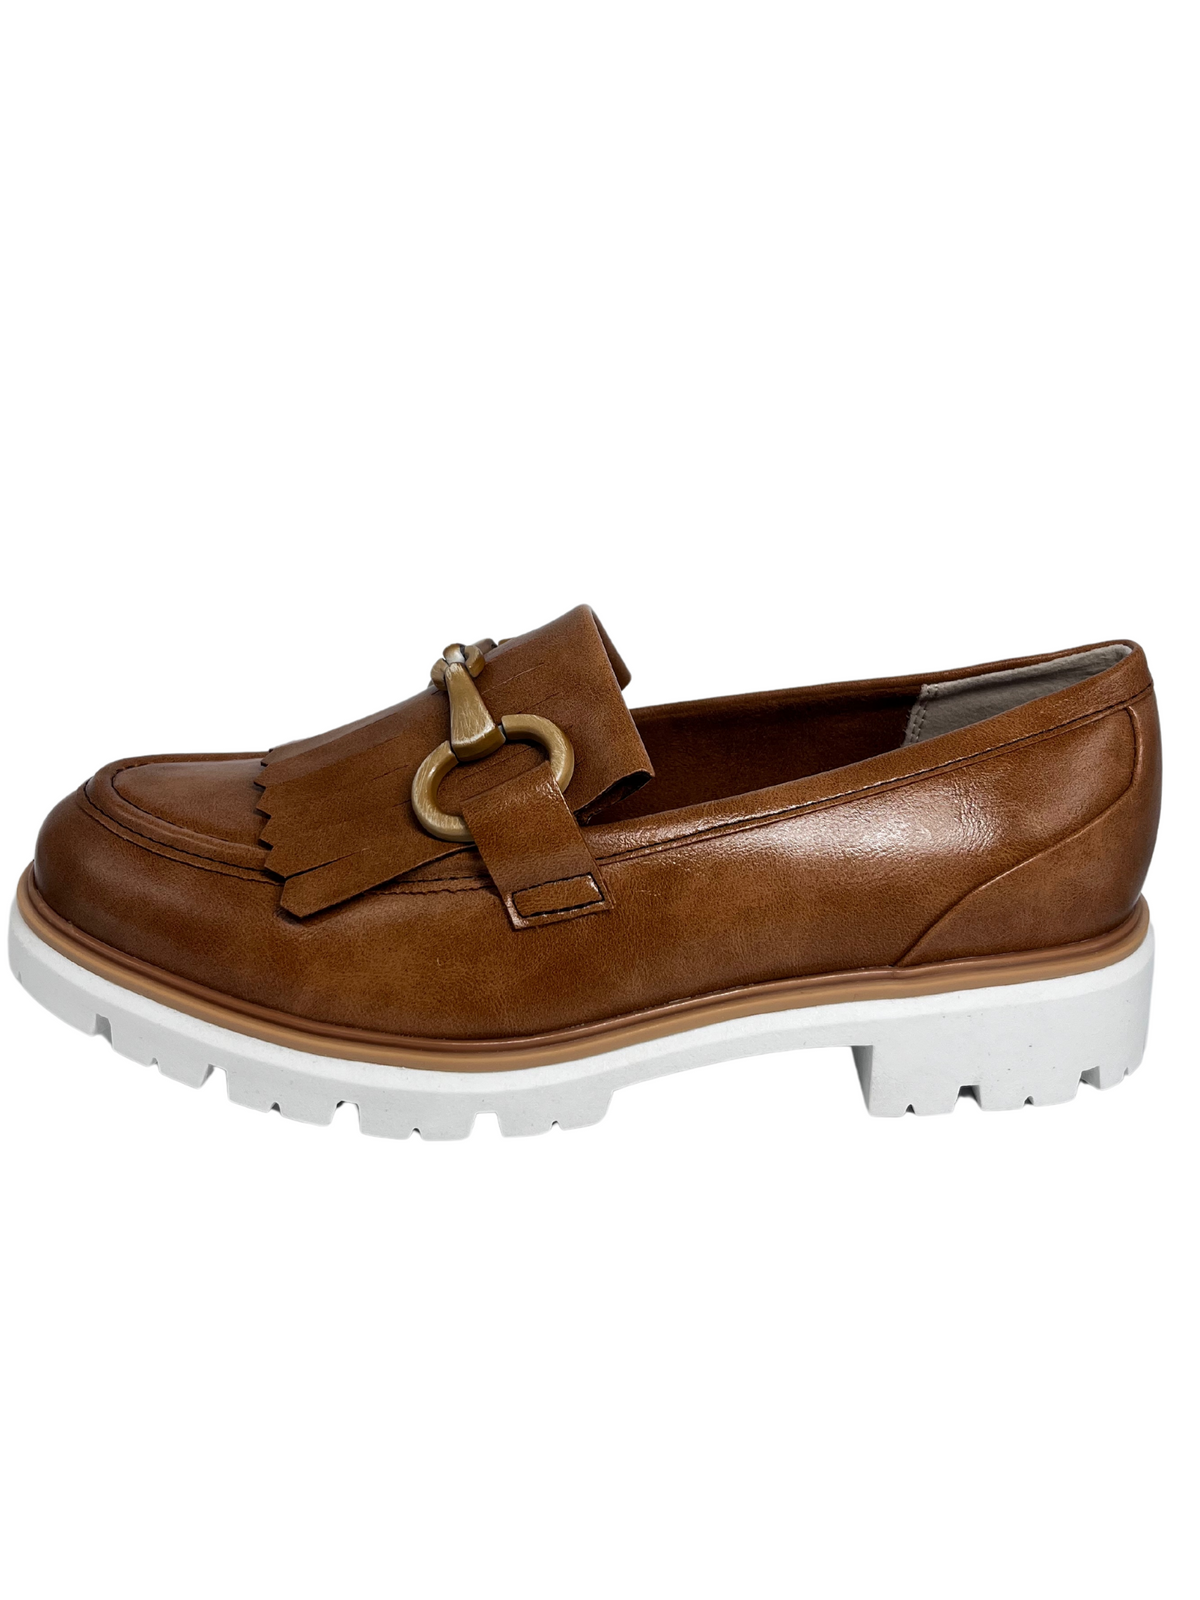 Marco Tozzi Cognac Loafer With Tassle Design